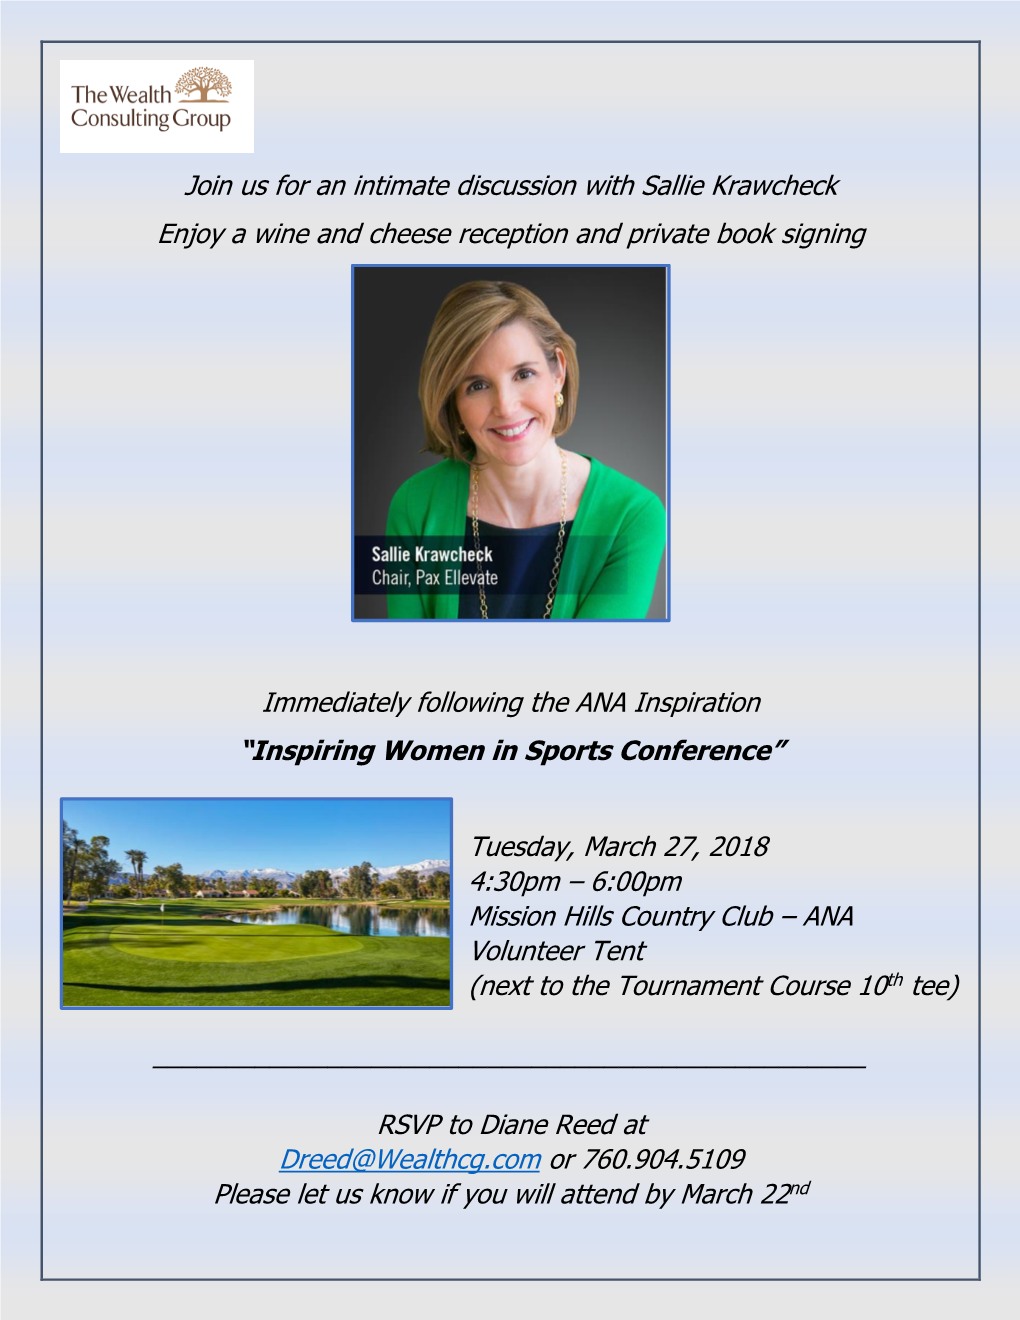 Join Us for an Intimate Discussion with Sallie Krawcheck Enjoy a Wine and Cheese Reception and Private Book Signing